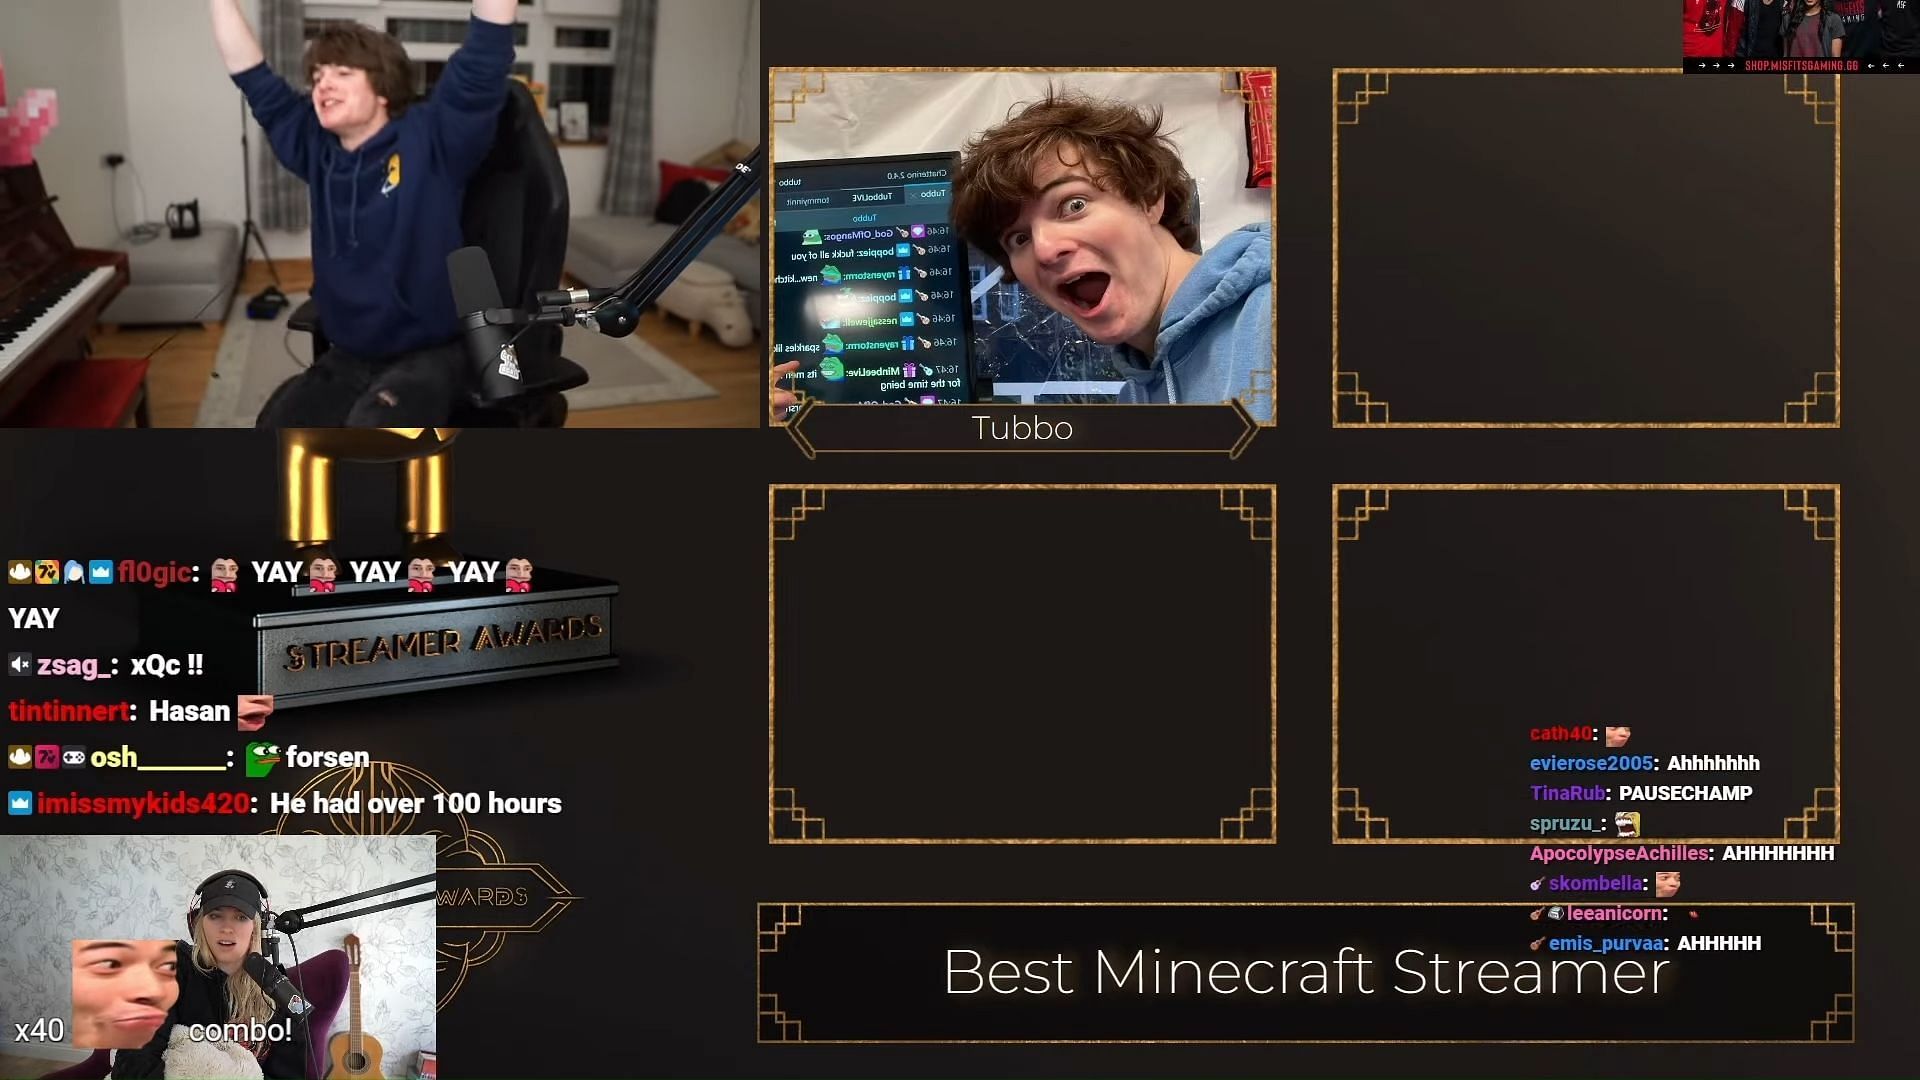 Tubbo has been nominated for the Minecraft Streamer of the Year award (Image via Canooon/YouTube)